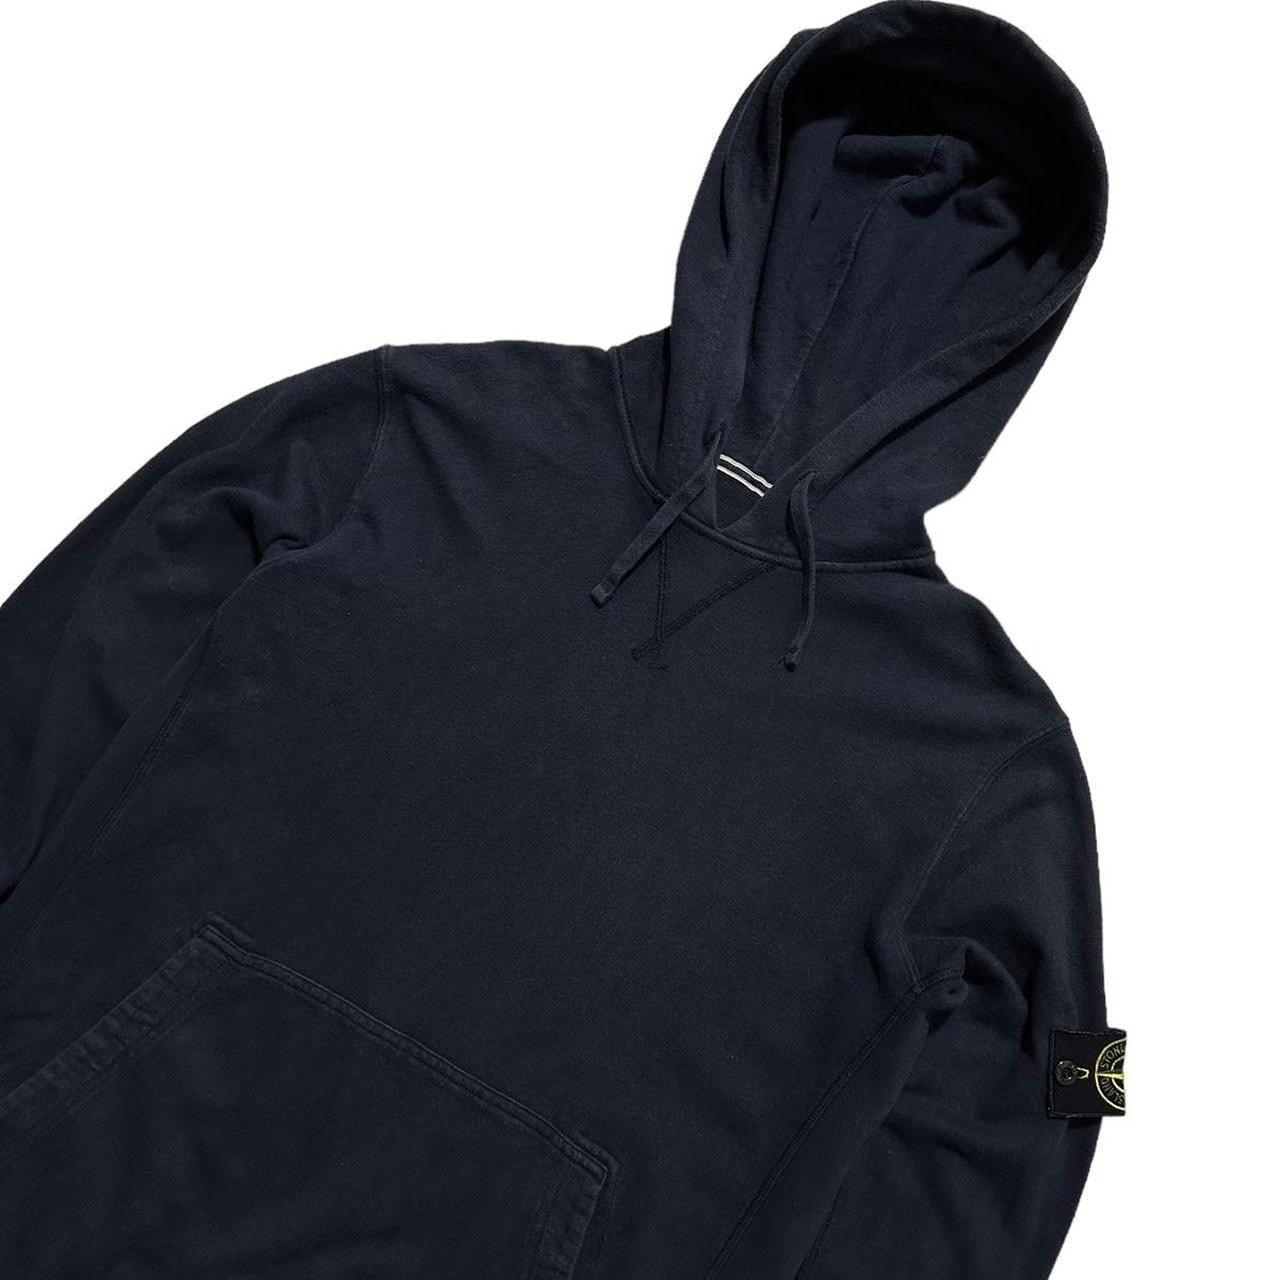 Stone Island Navy Pullover Hoodie - Known Source